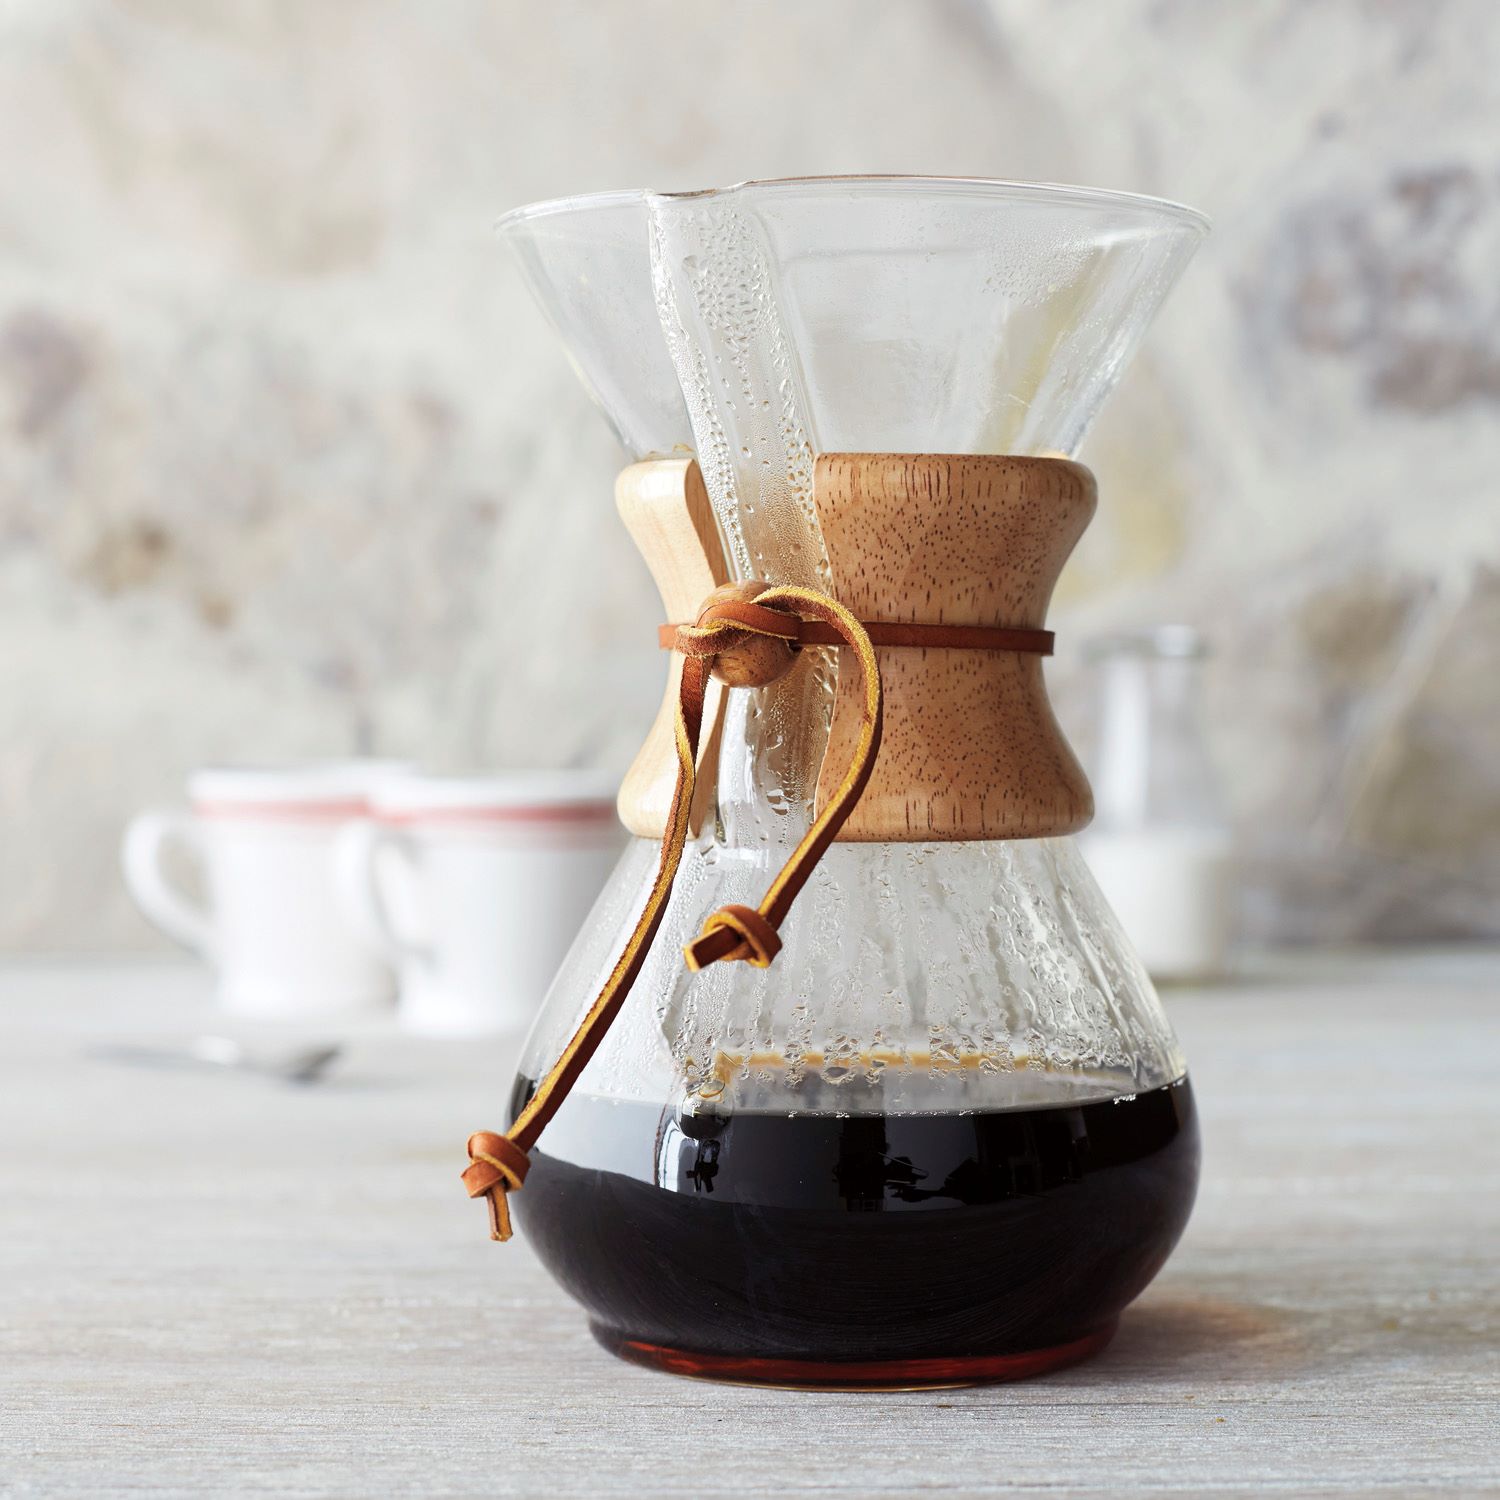 2023 sur la table holiday gift guide, gifts for coffee lovers, Chemex pour over carafe